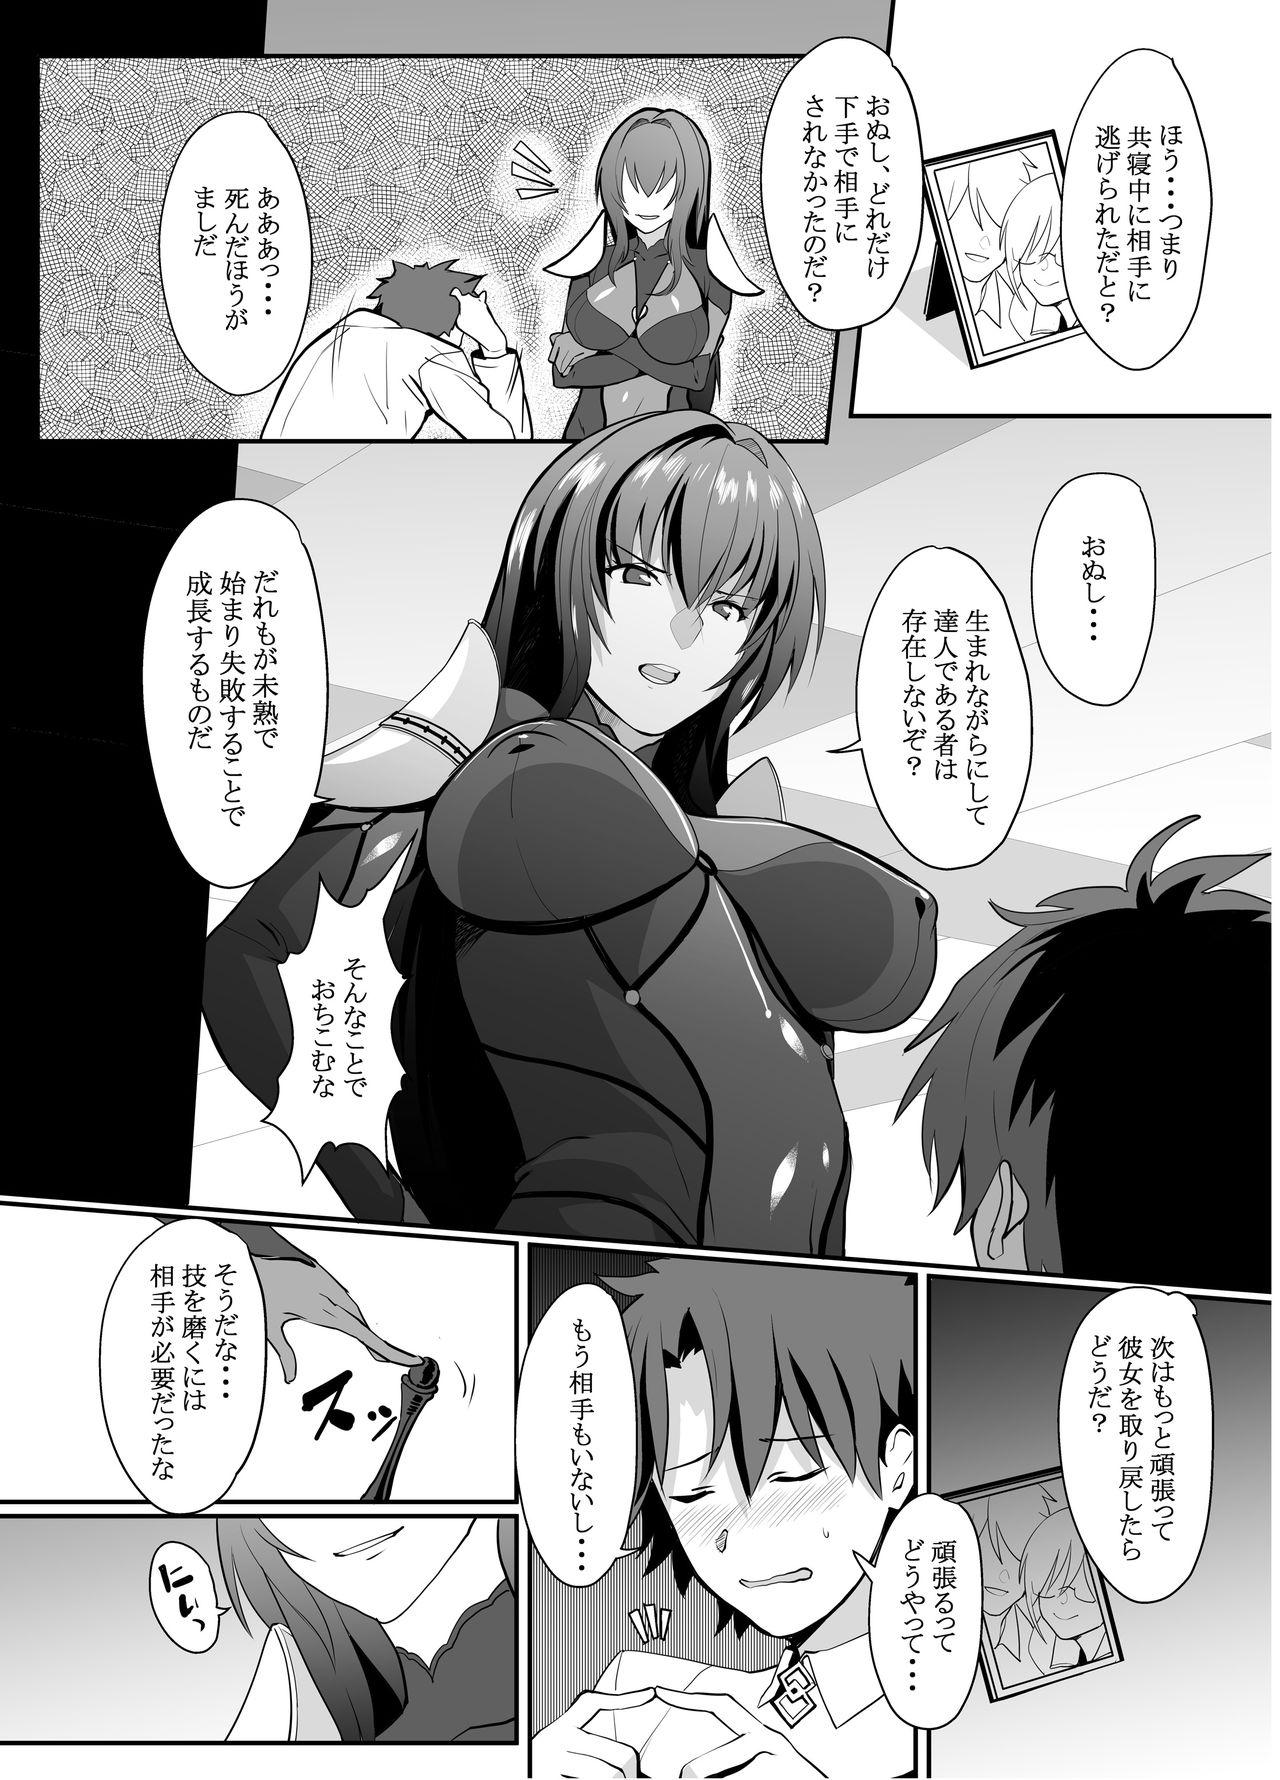 Smooth Scathach Shishou no Dosukebe Lesson - Fate grand order Full Movie - Page 4